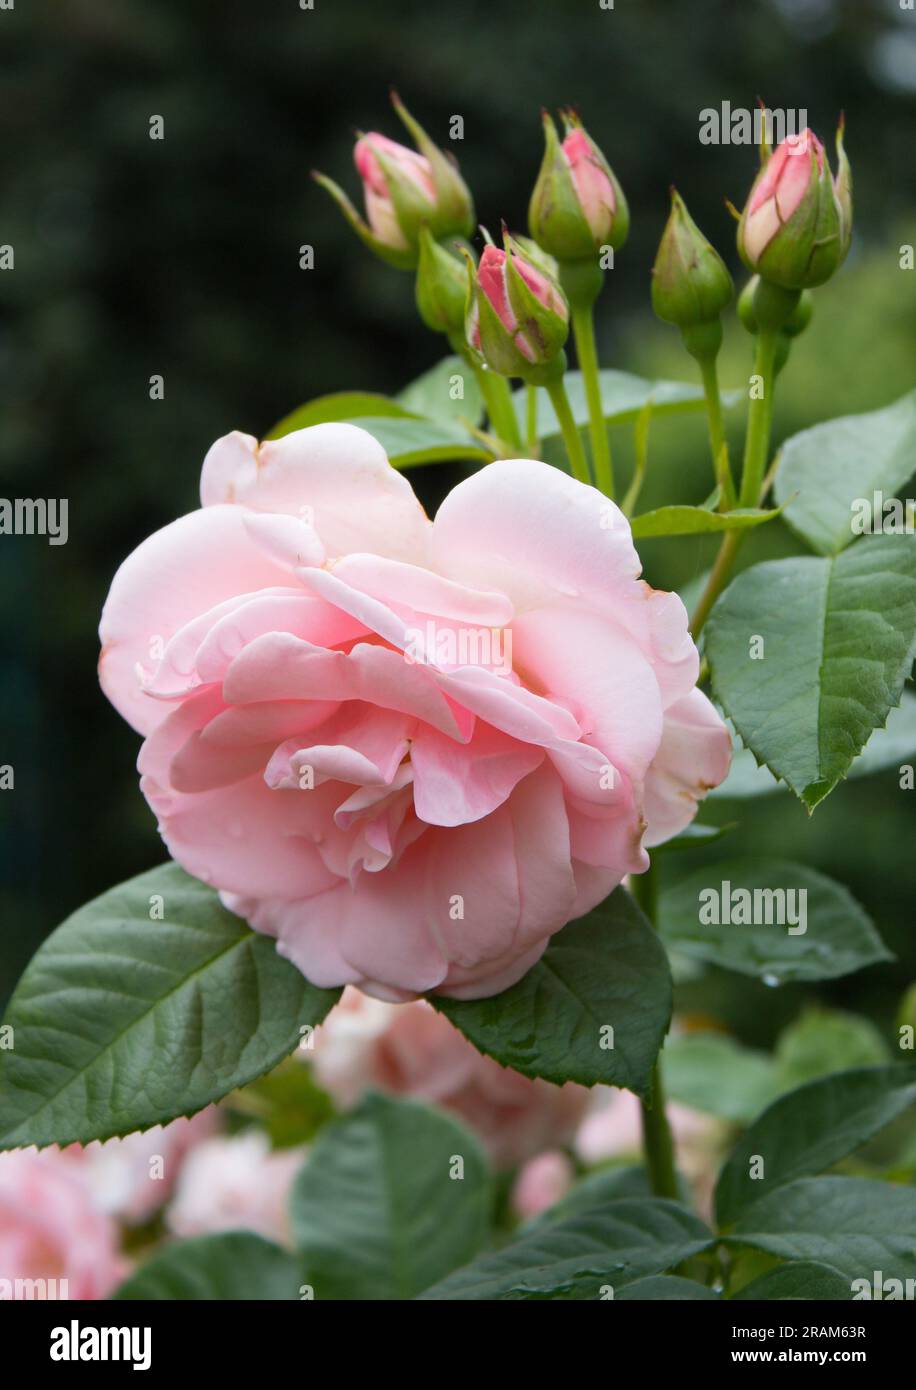 Delicate white-pink rose in the garden 5.07.2023 Bialystok Poland. Beautiful roses during summer growth. Stock Photo